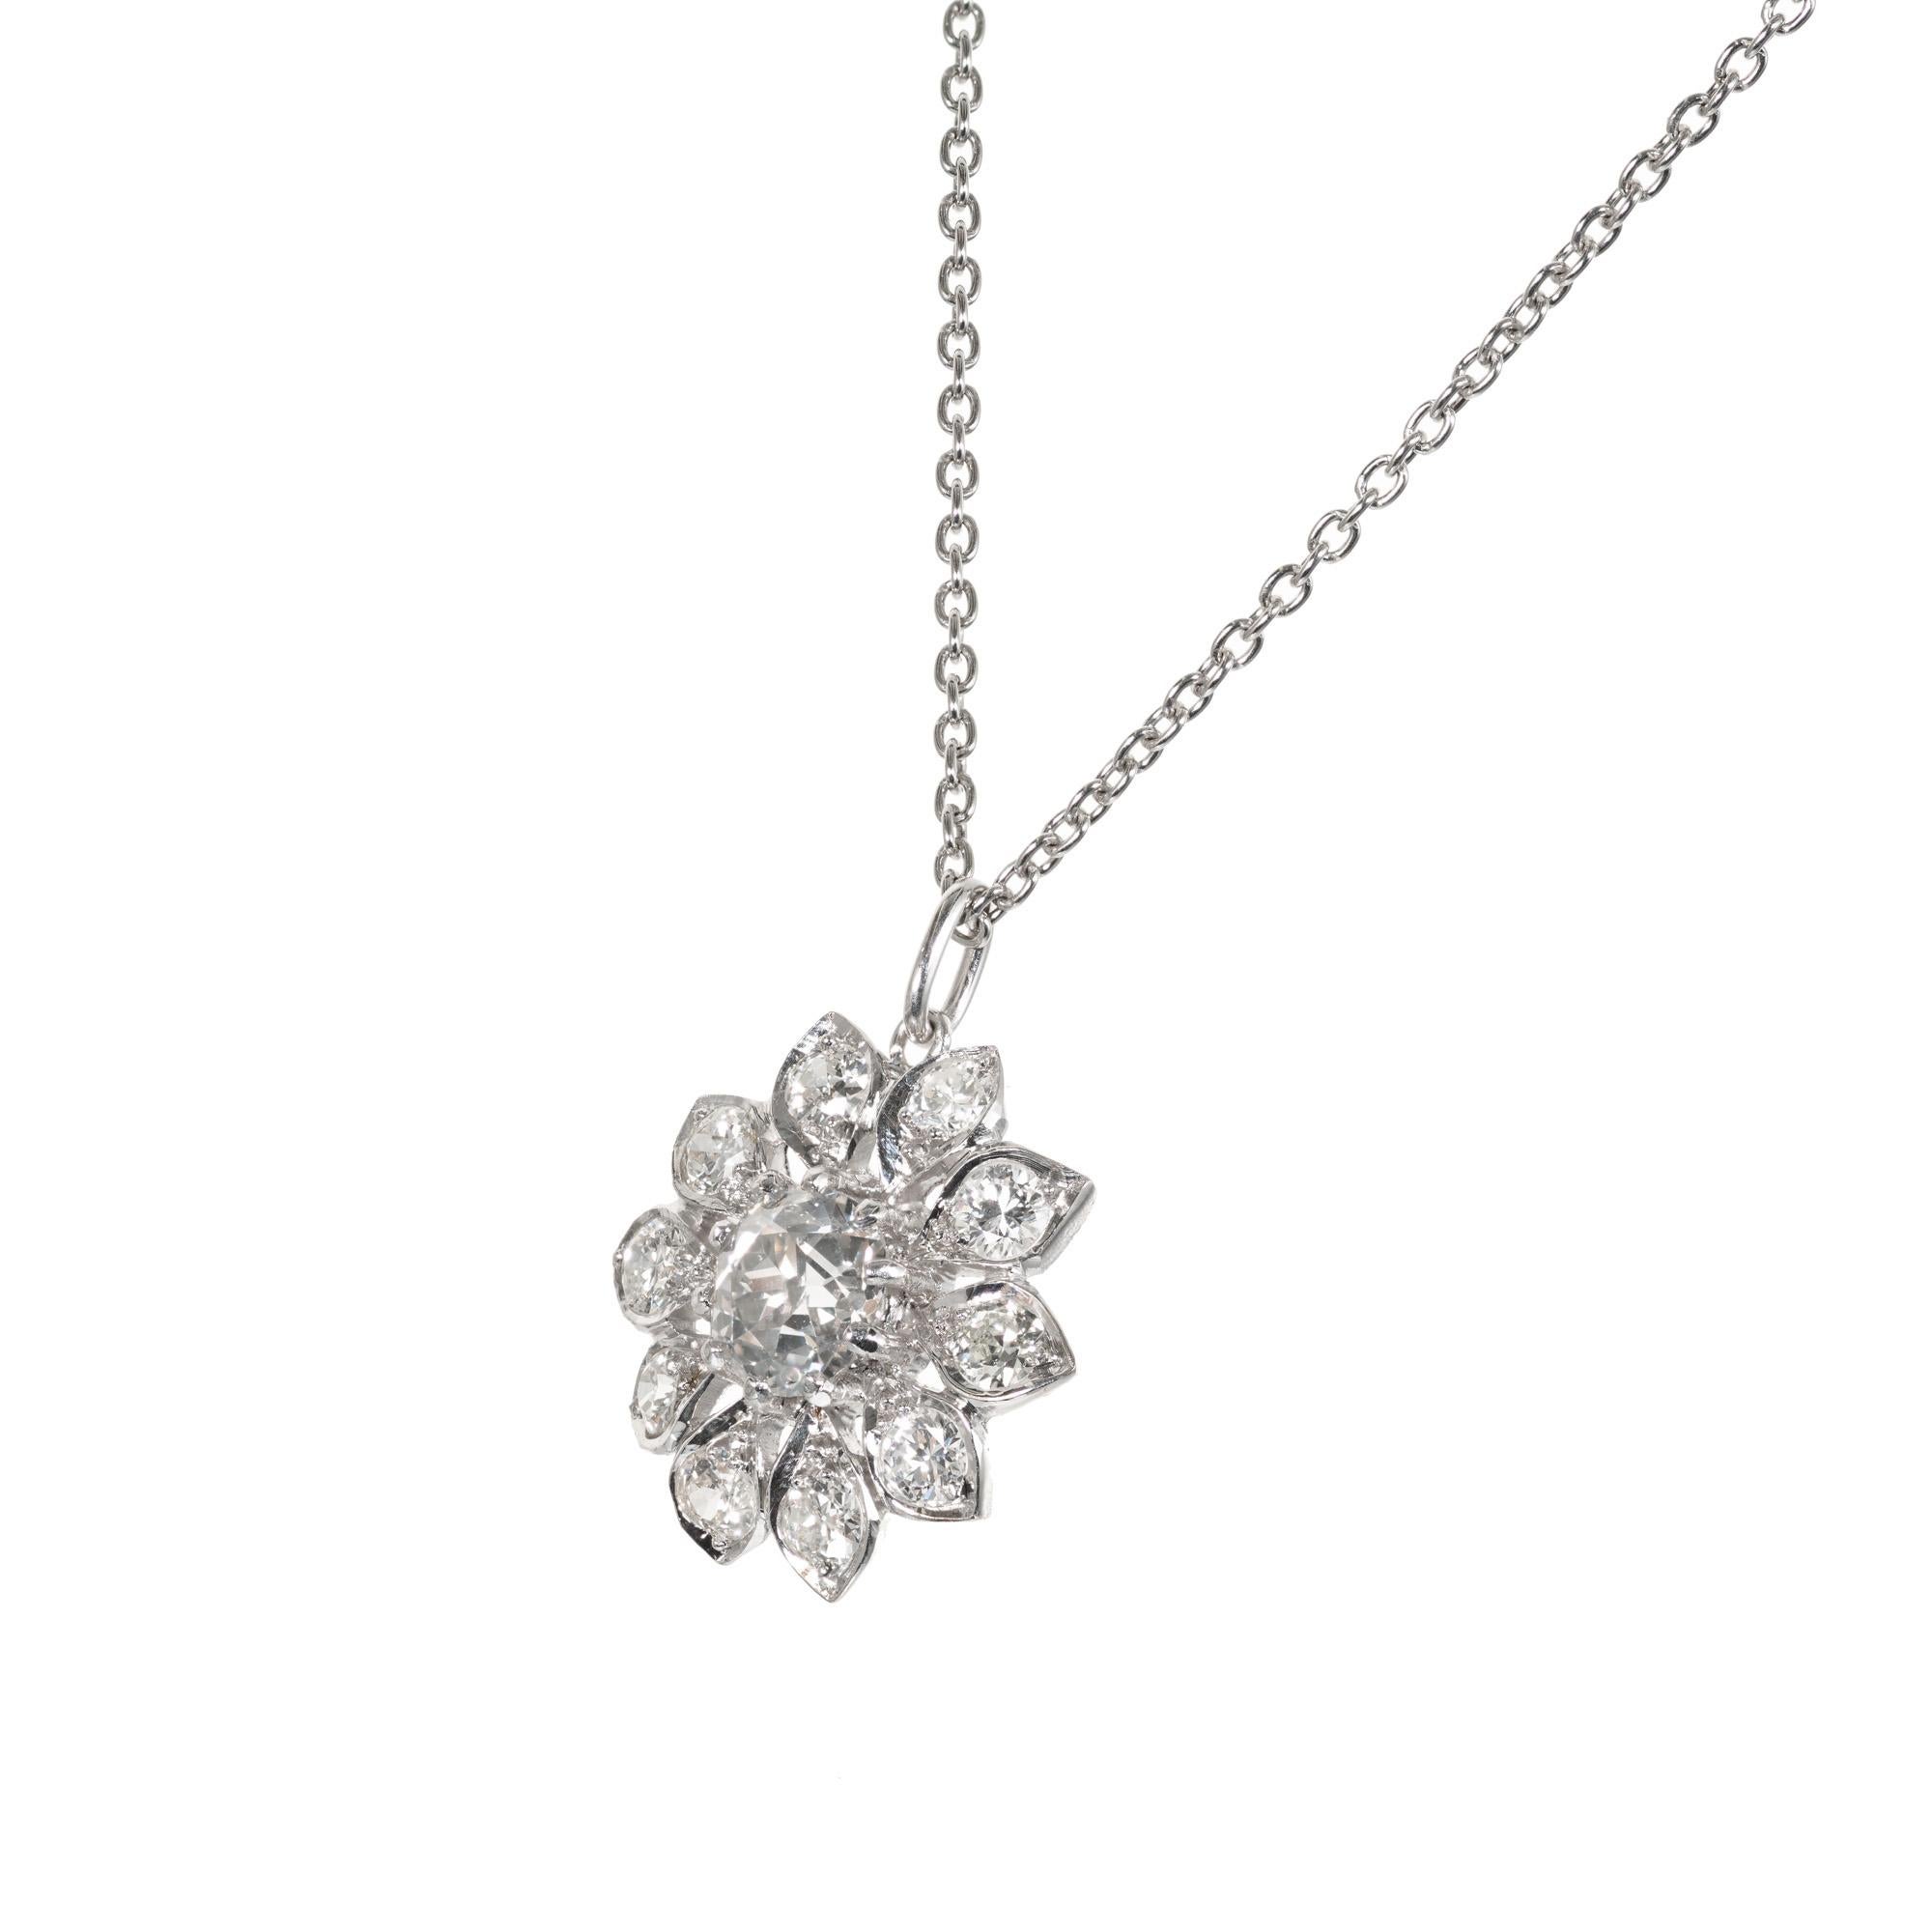 Handmade diamond platinum flower pendant on a 16 Inch platinum chain.

1 old European cut diamond L SI approx.  .78cts
10 round diamonds J-K SI 2, approx. .80cts
Platinum 
6.3 grams
Top to Bottom: 16.98mm or 11/16 Inches
Width: 16.5mm or 10/16